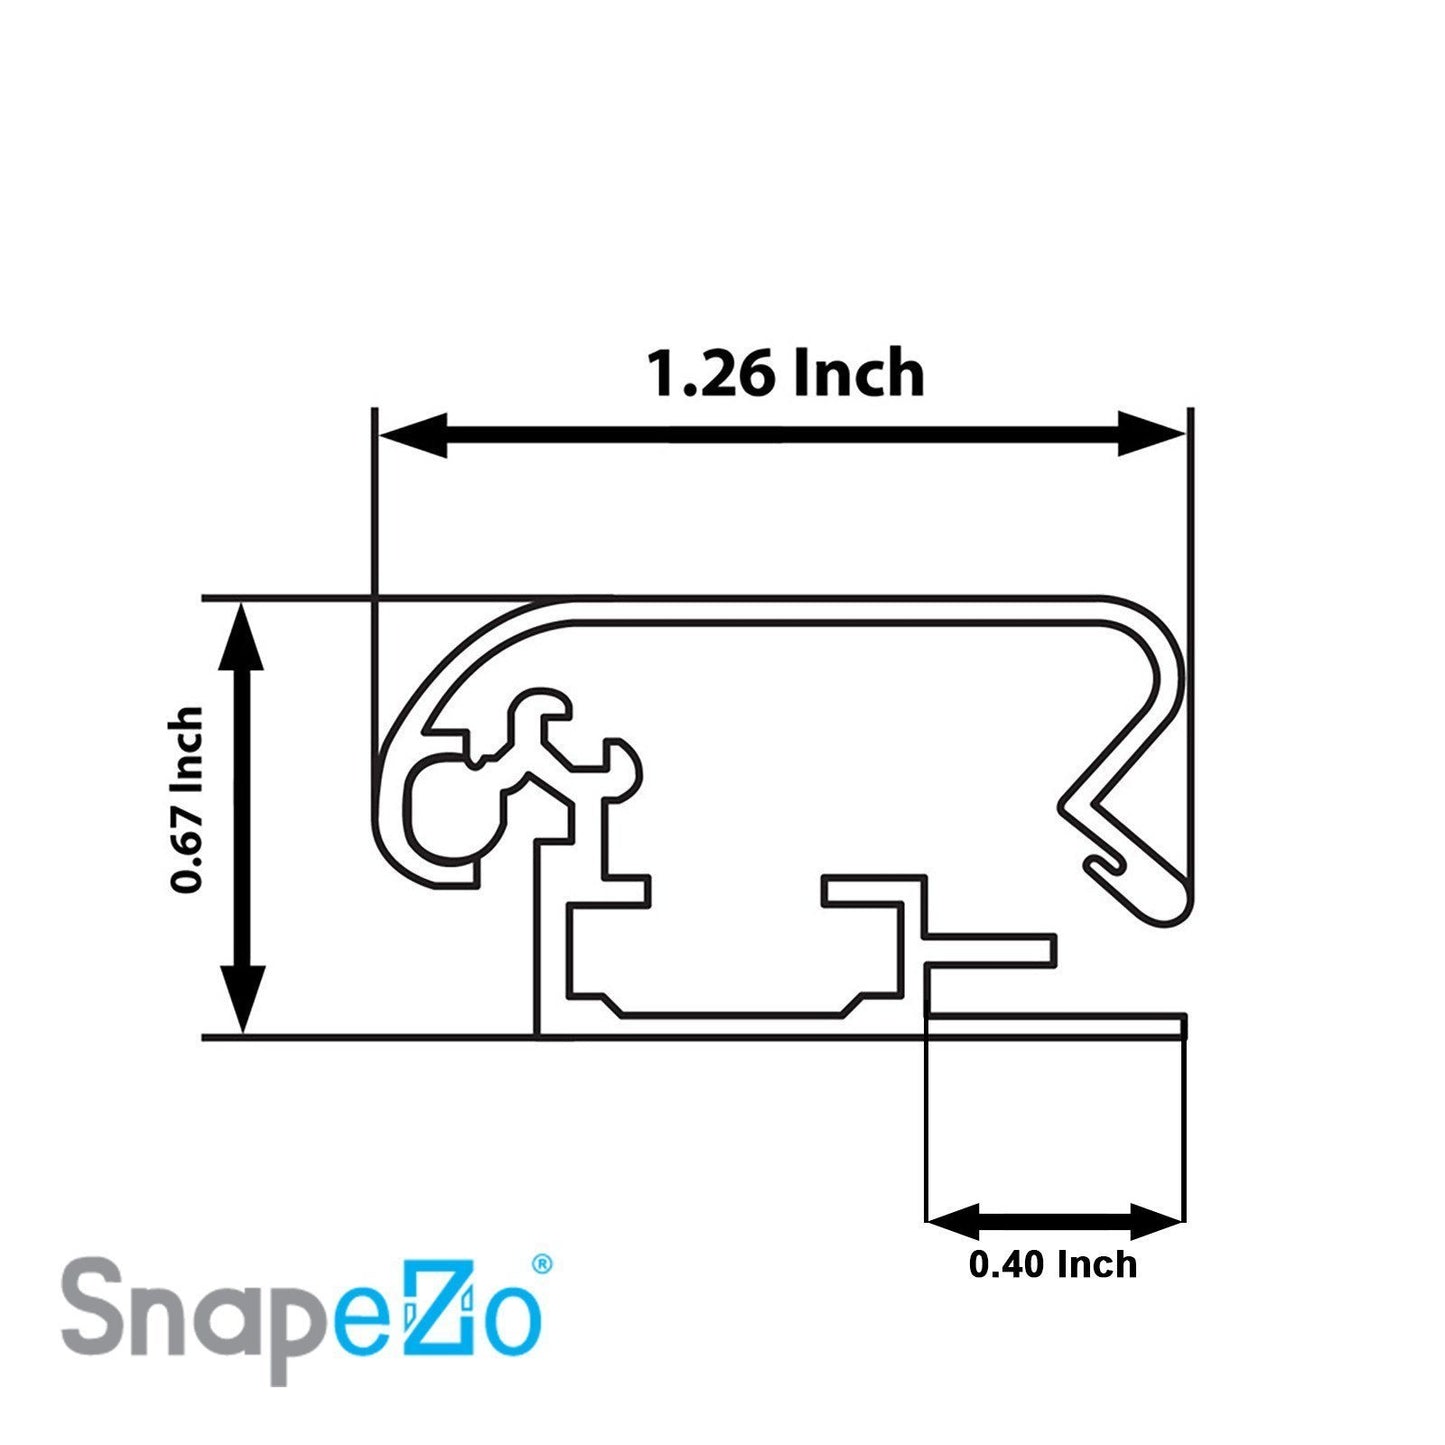 Load image into Gallery viewer, 20x30 Black SnapeZo® Snap Frame - 1.25 Inch Profile
